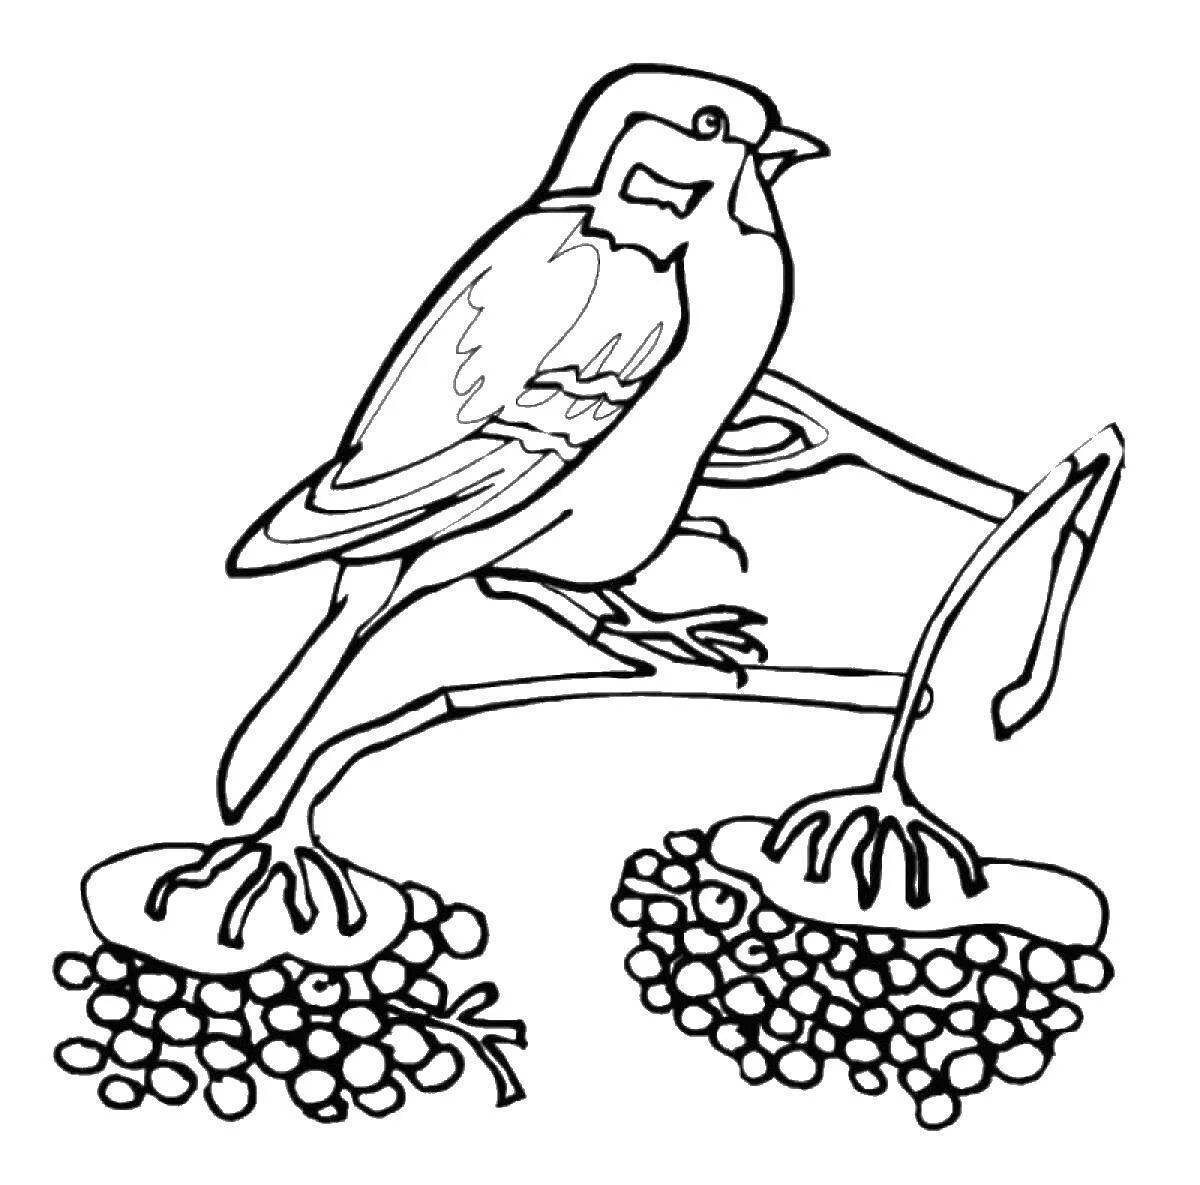 Playful bird feeder coloring page for kids in winter